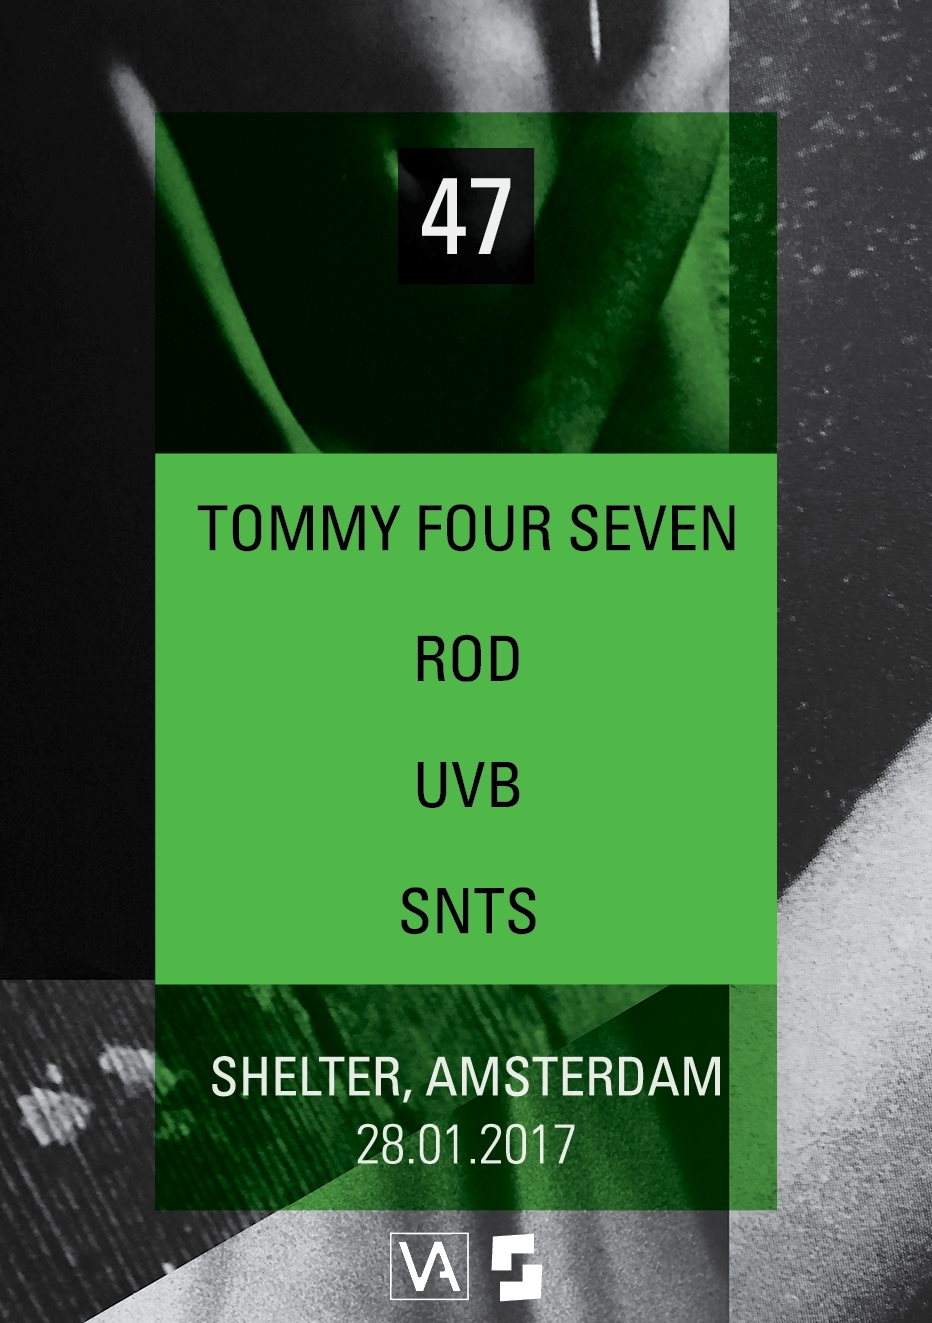 Vault Sessions x 47 with Tommy Four Seven, ROD, UVB & Snts Live - Página trasera